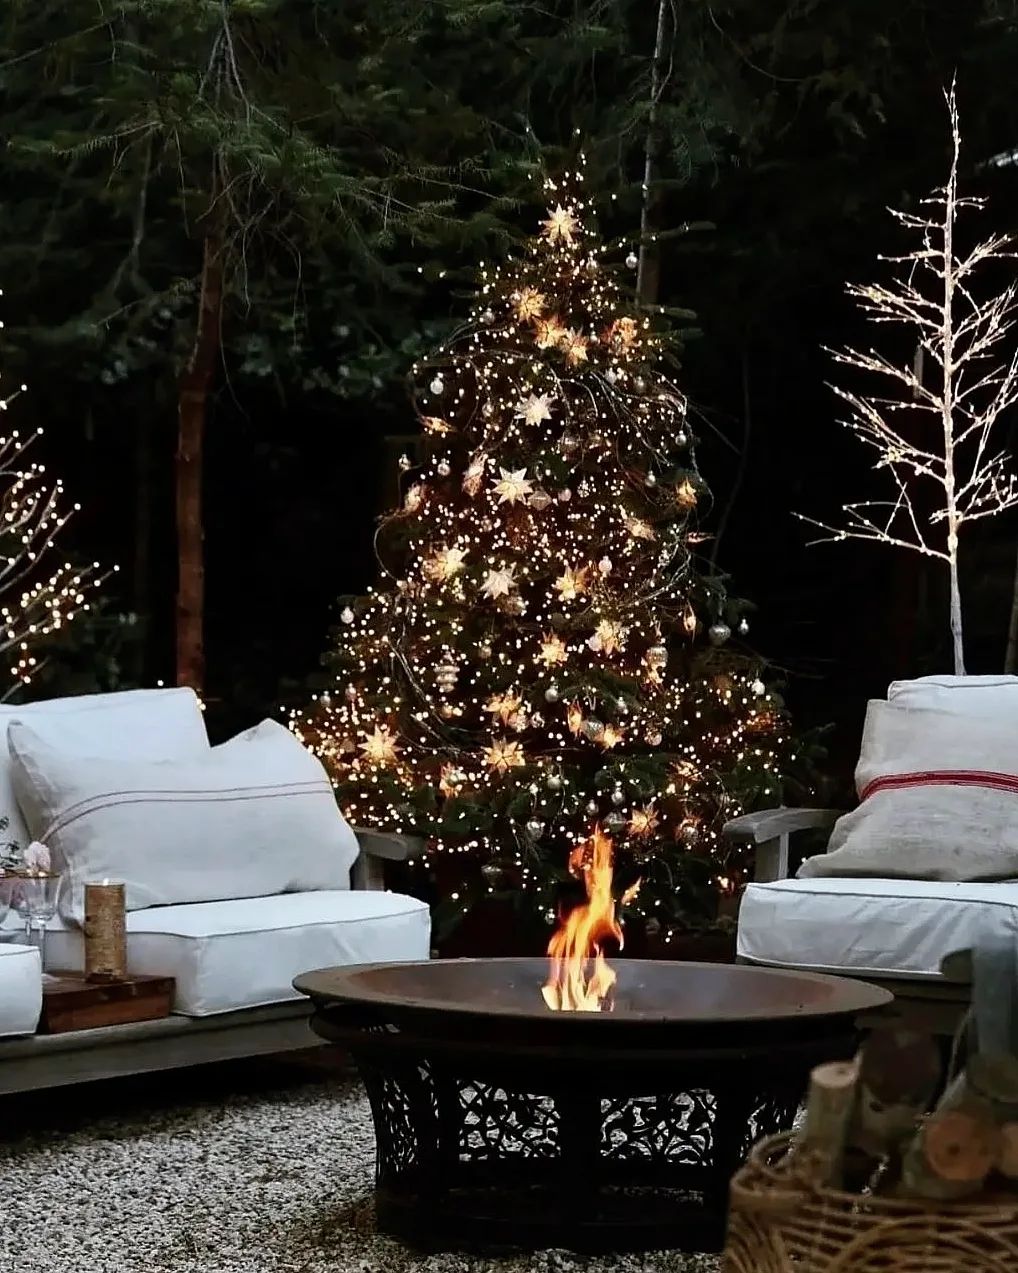 Outdoor patio featuring fire pit with chairs around it and Christmas tree featuring outdoor decorating ideas